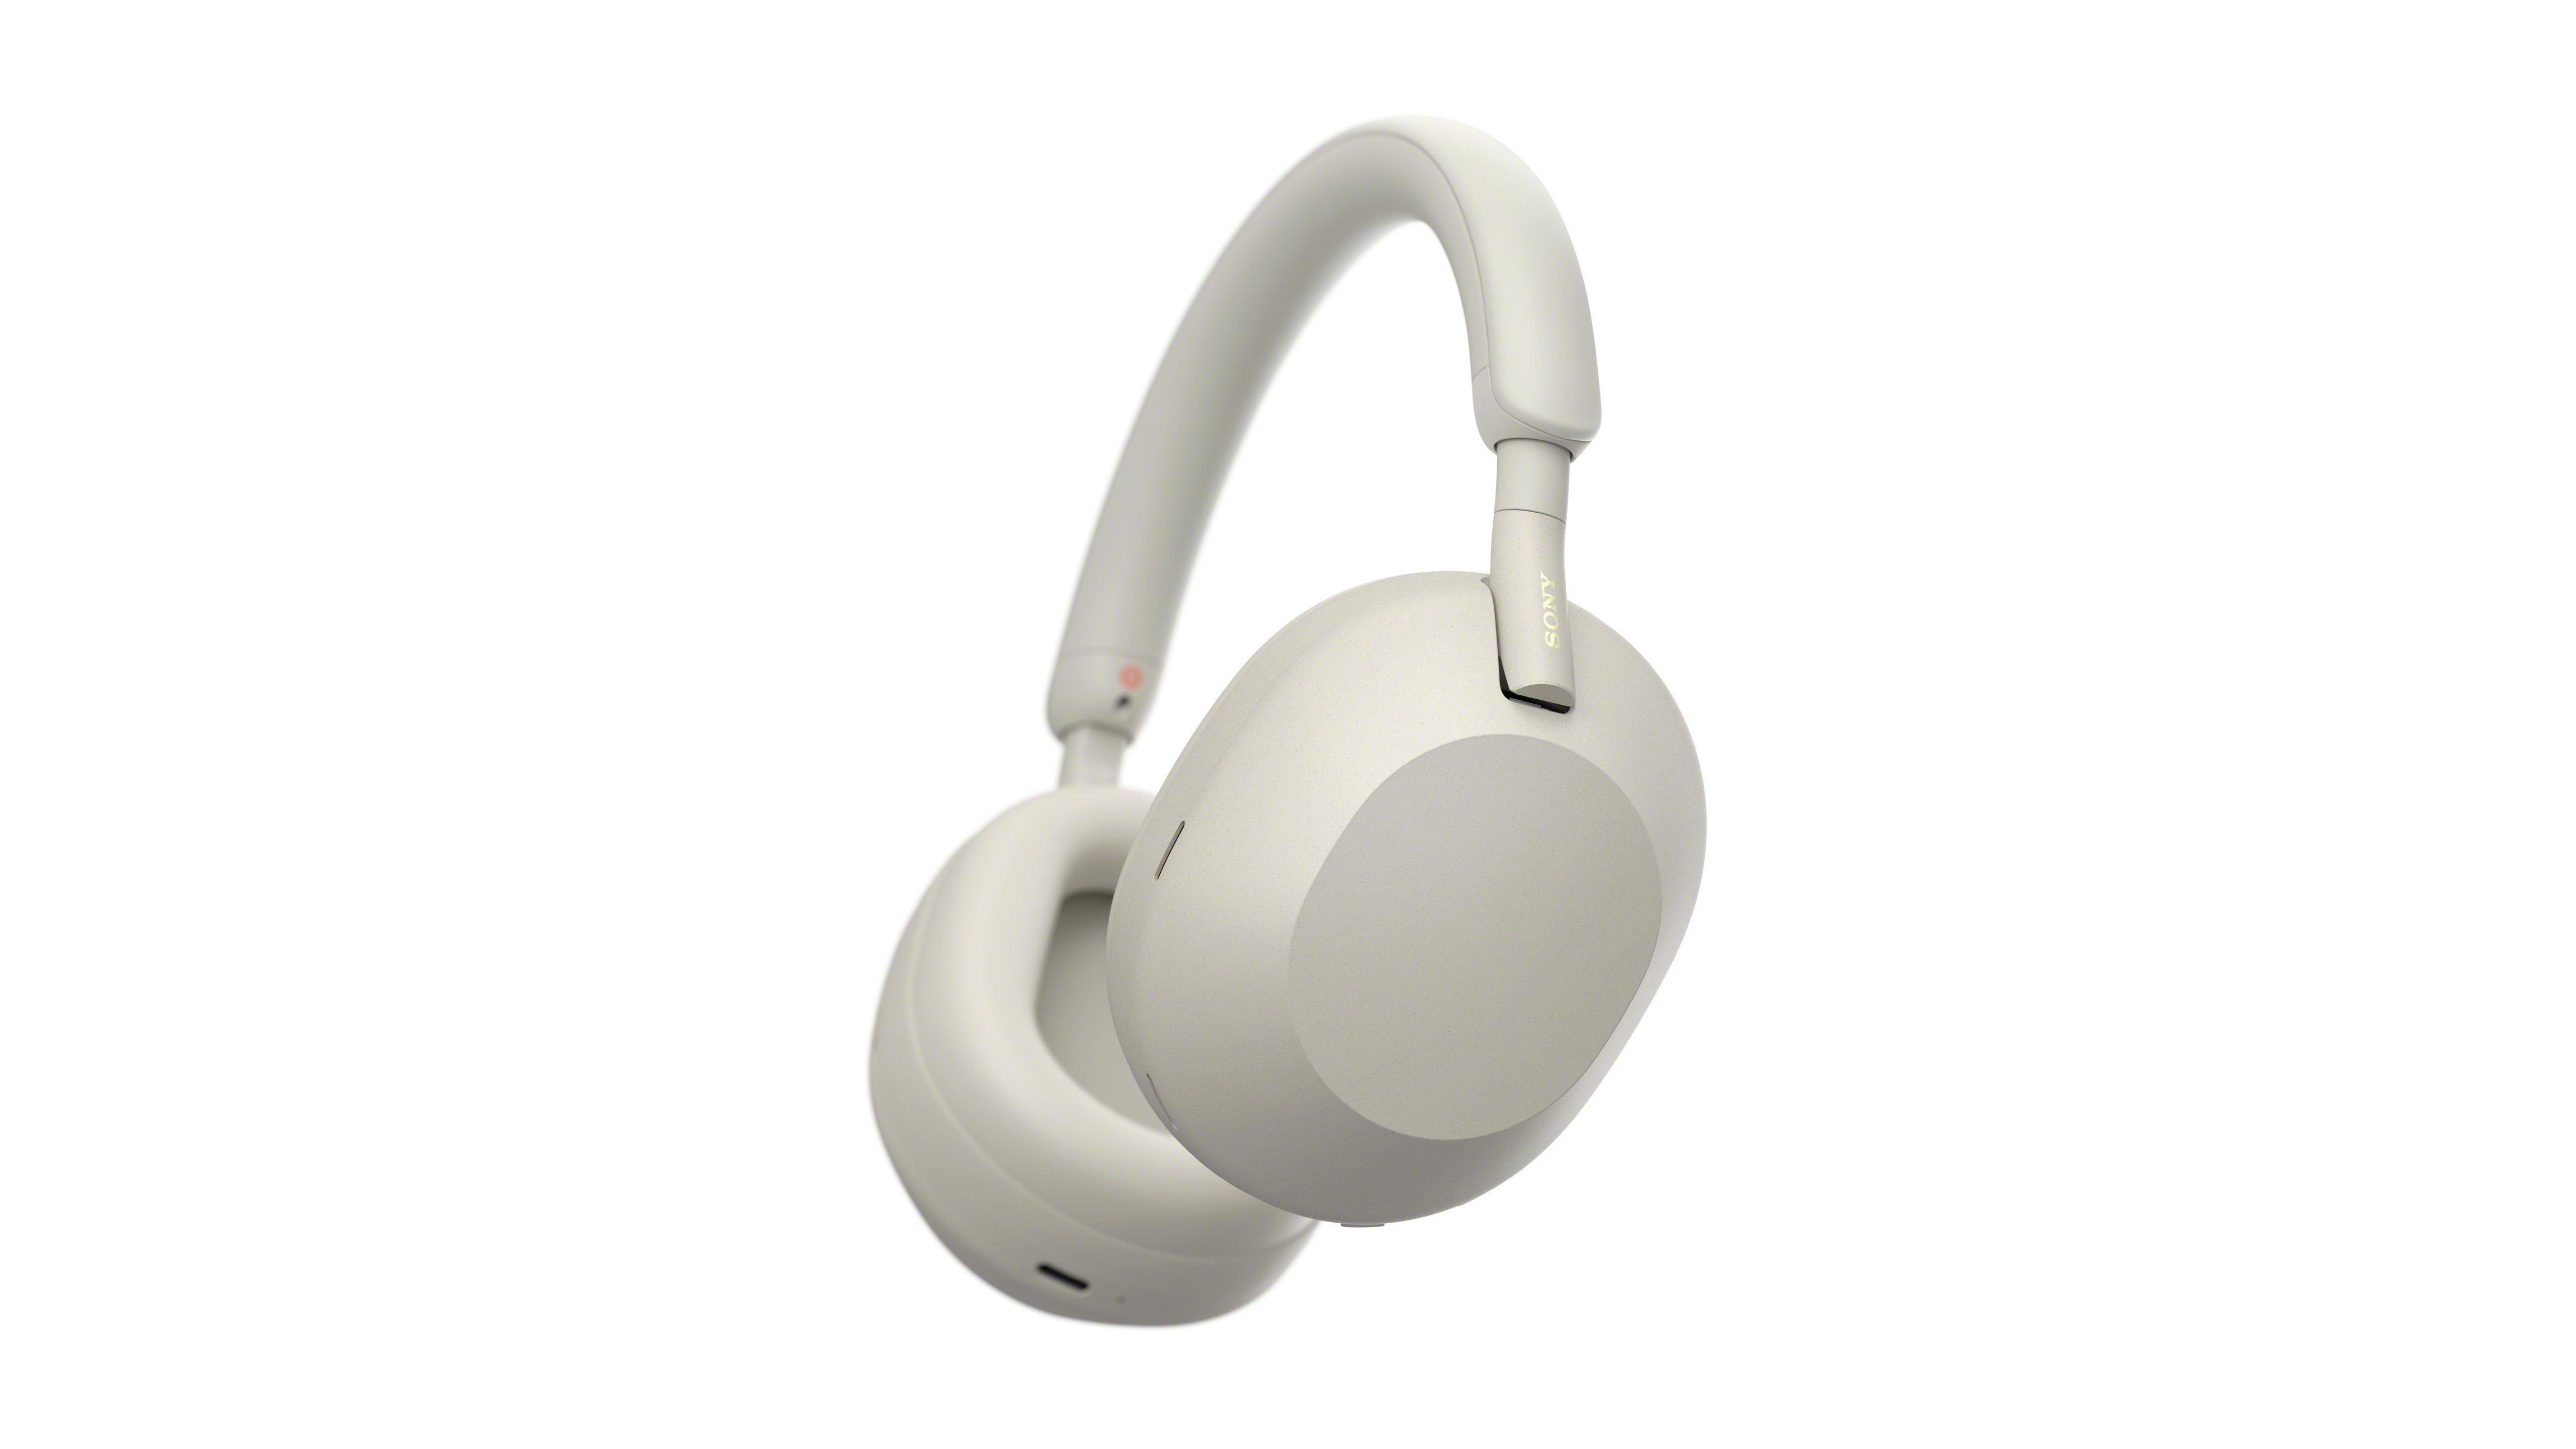 The Sony WH-1000XM5 Wireless Headphones on a plain white background.